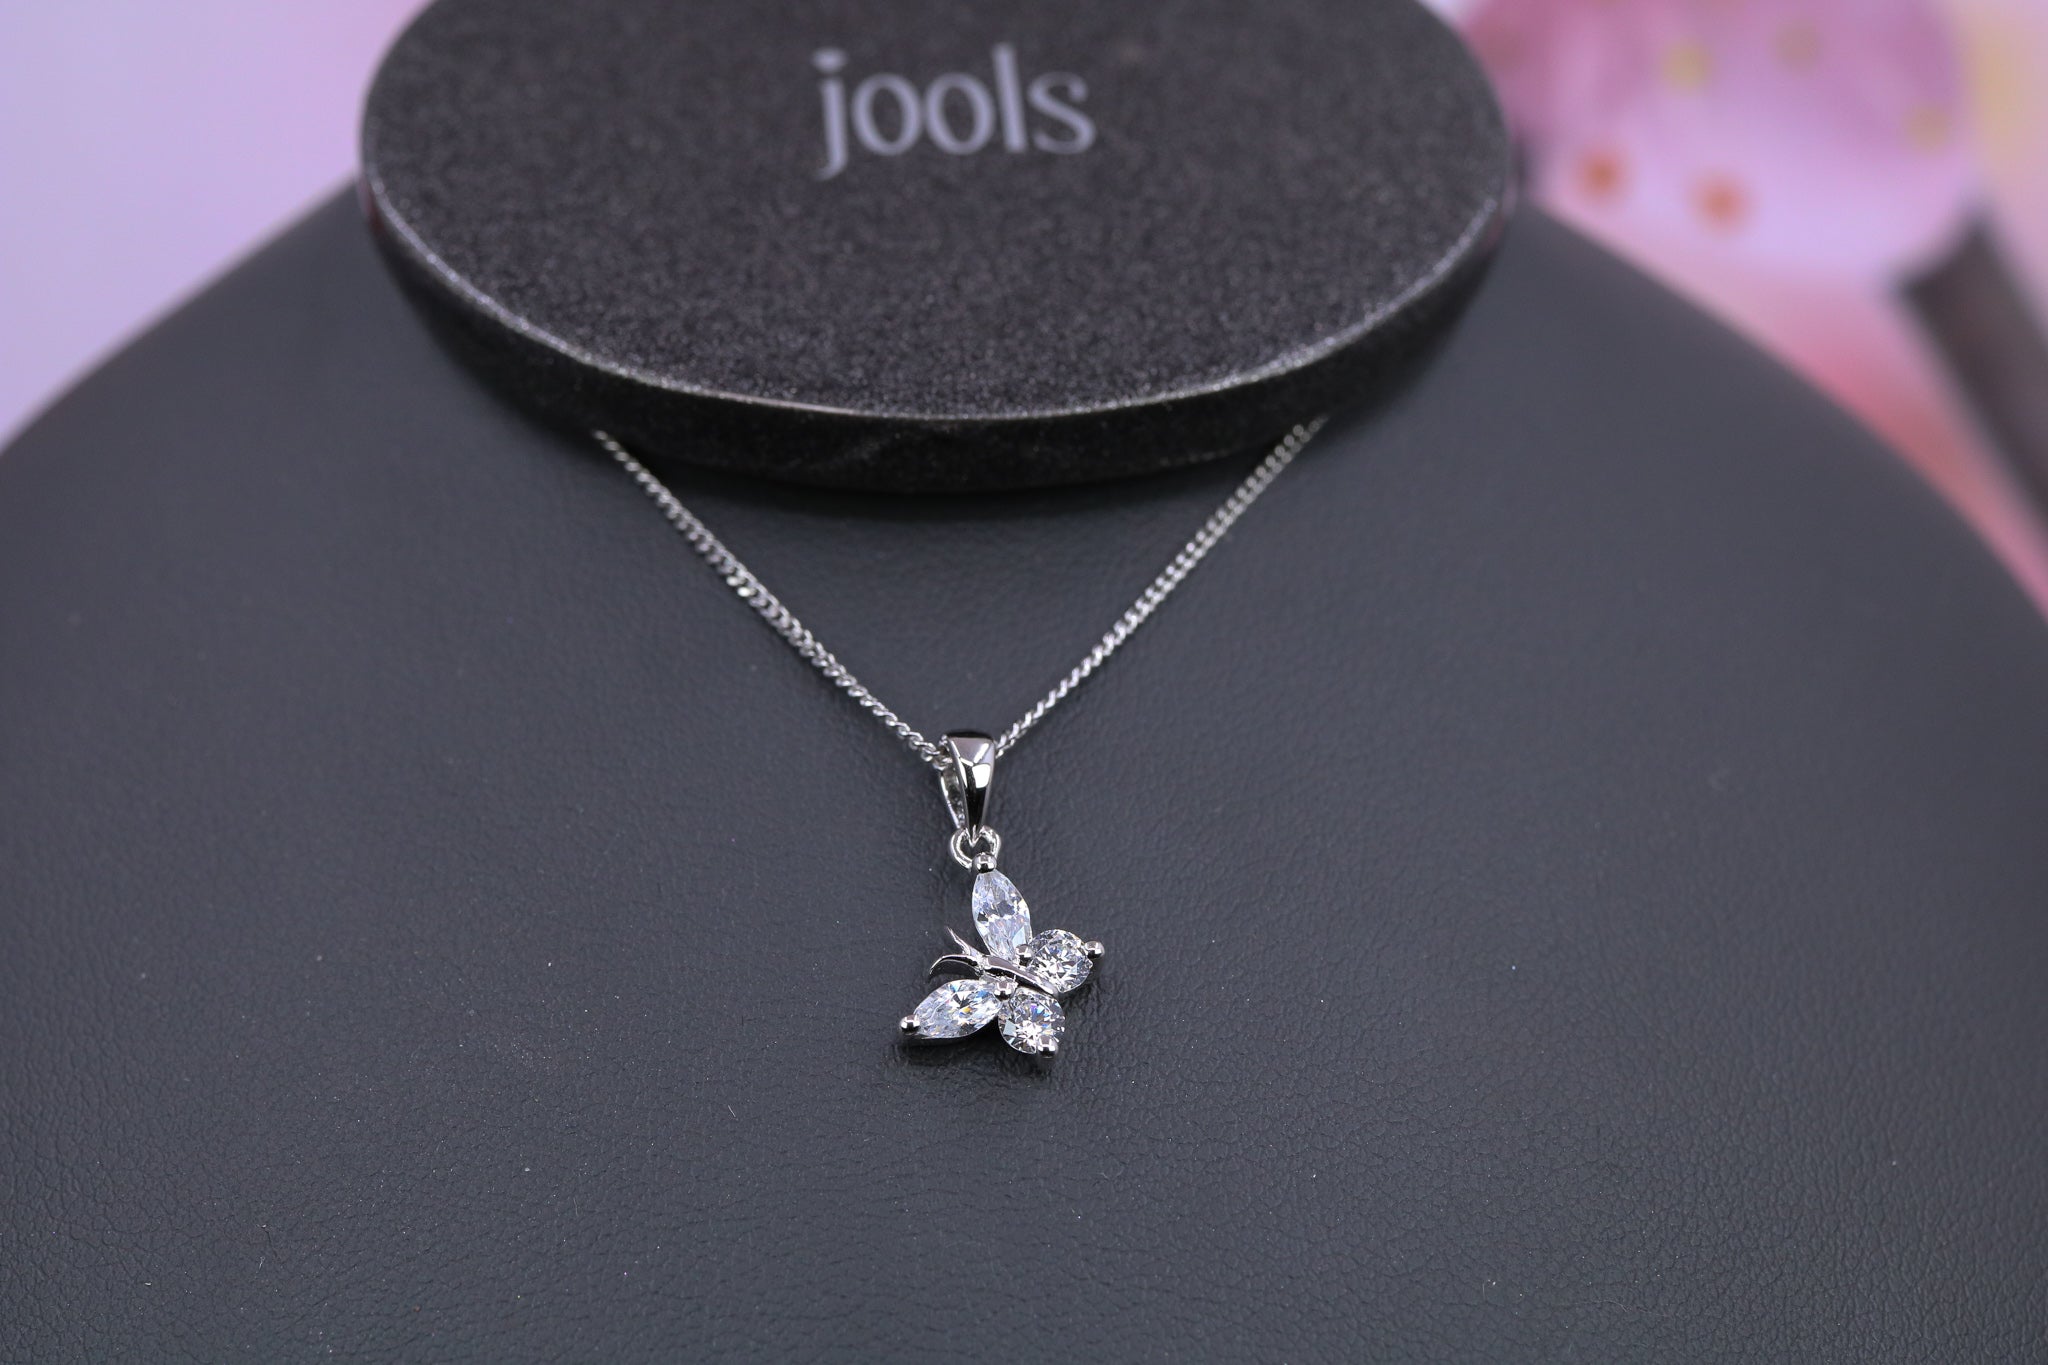 Jools Sterling Silver Pendant & Chain - JL1009 - Hallmark Jewellers Formby & The Jewellers Bench Widnes